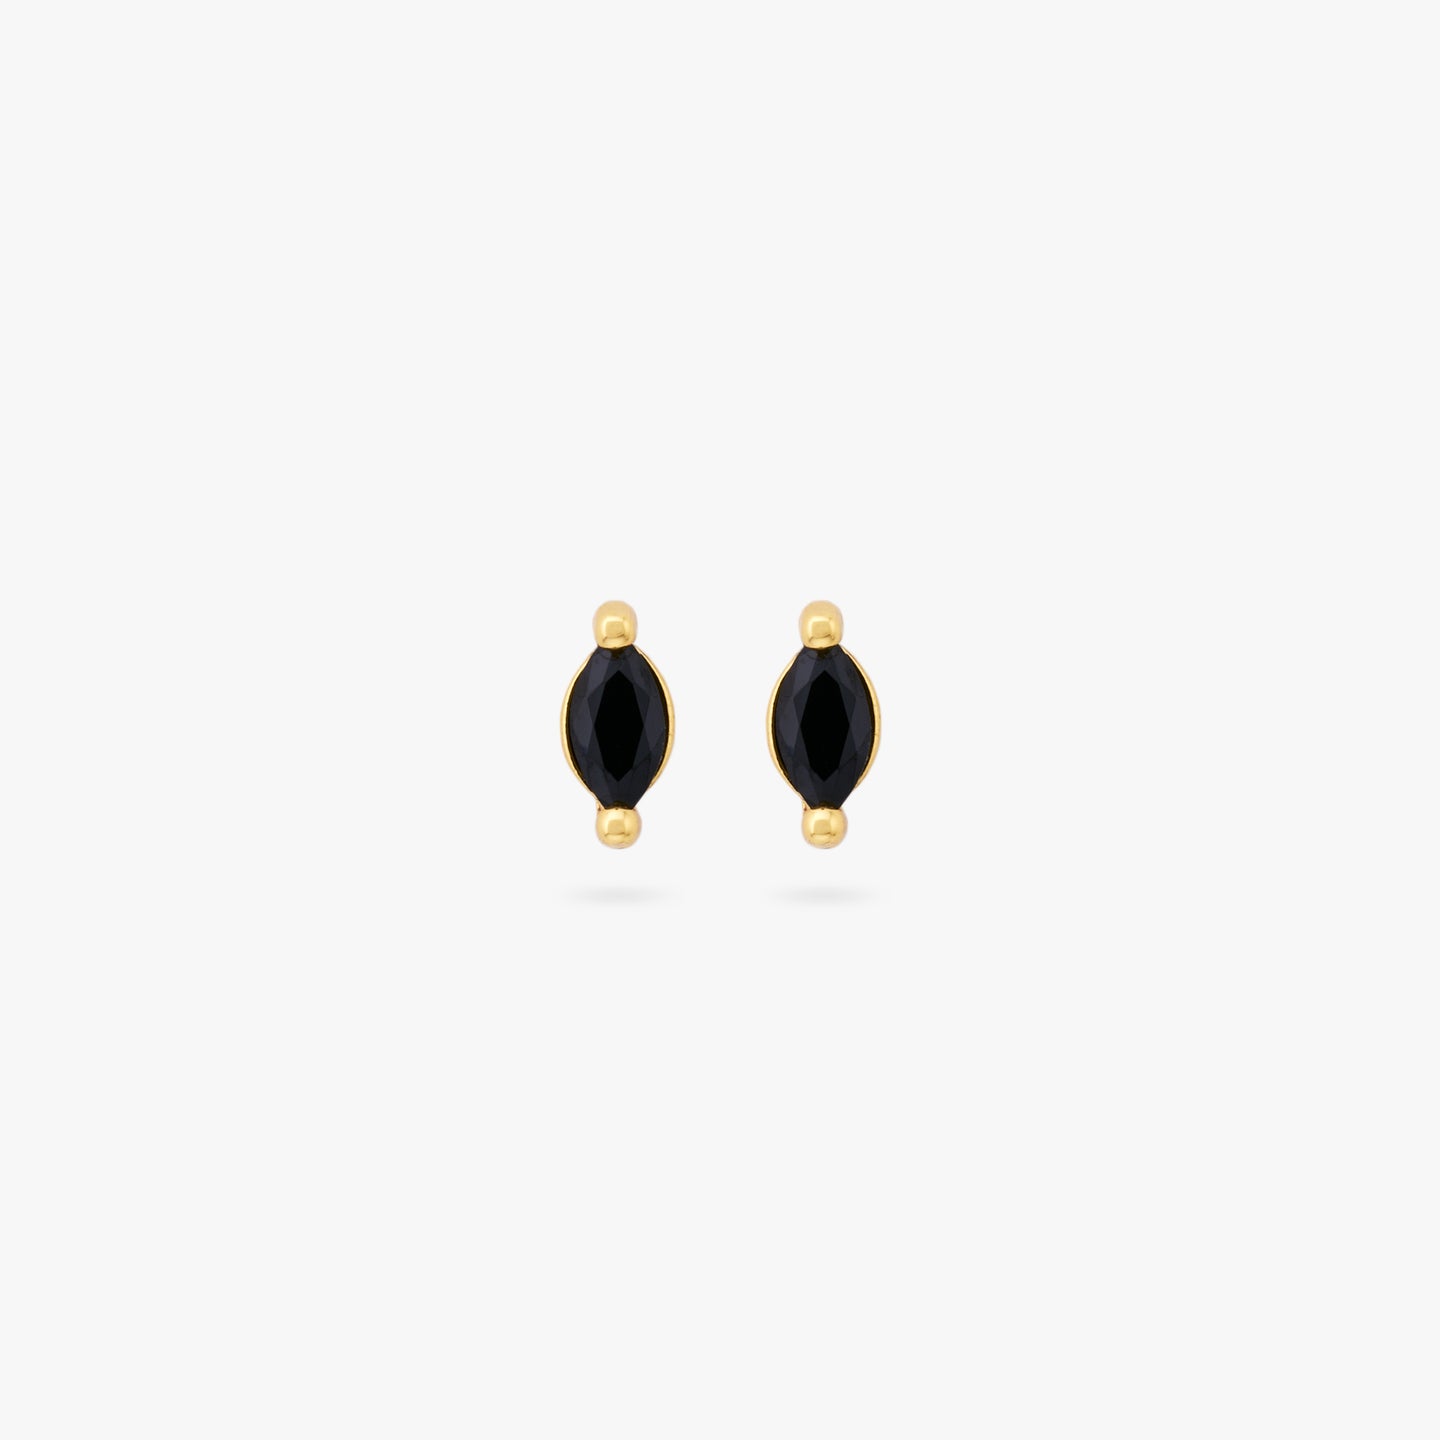 This is a pair of marquise mini studs featuring a black oblong shaped gems and has gold accents. [pair] color:null|gold/black